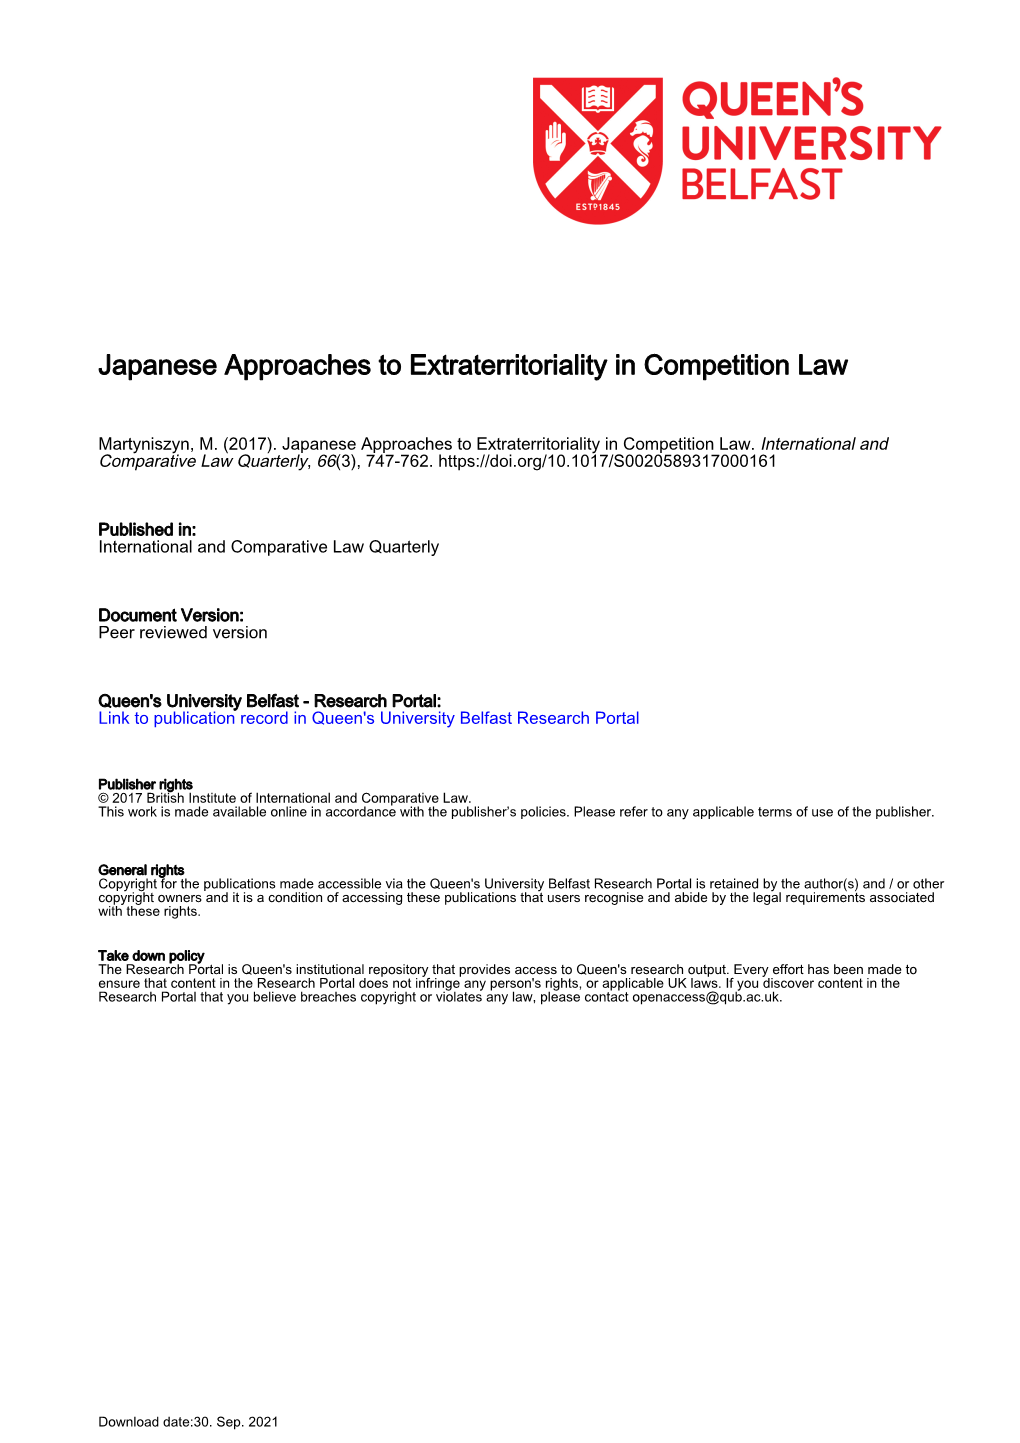 Japanese Approaches to Extraterritoriality in Competition Law